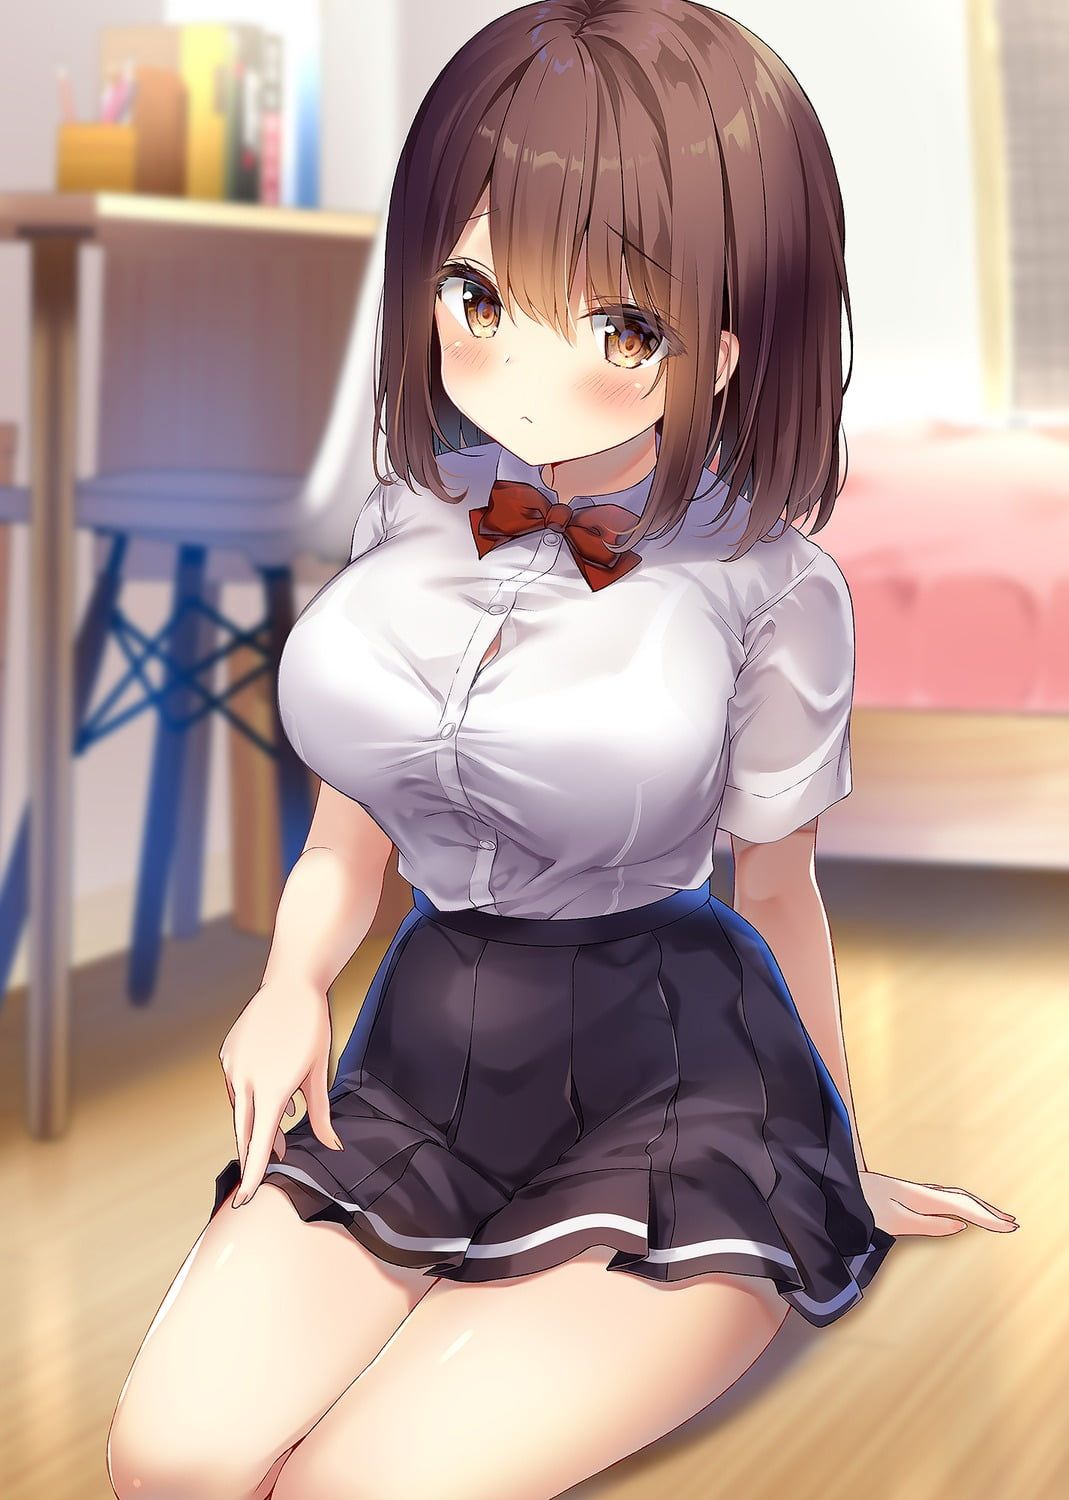 Uniform beautiful girl image feature that makes your chest swell just by looking at it 5